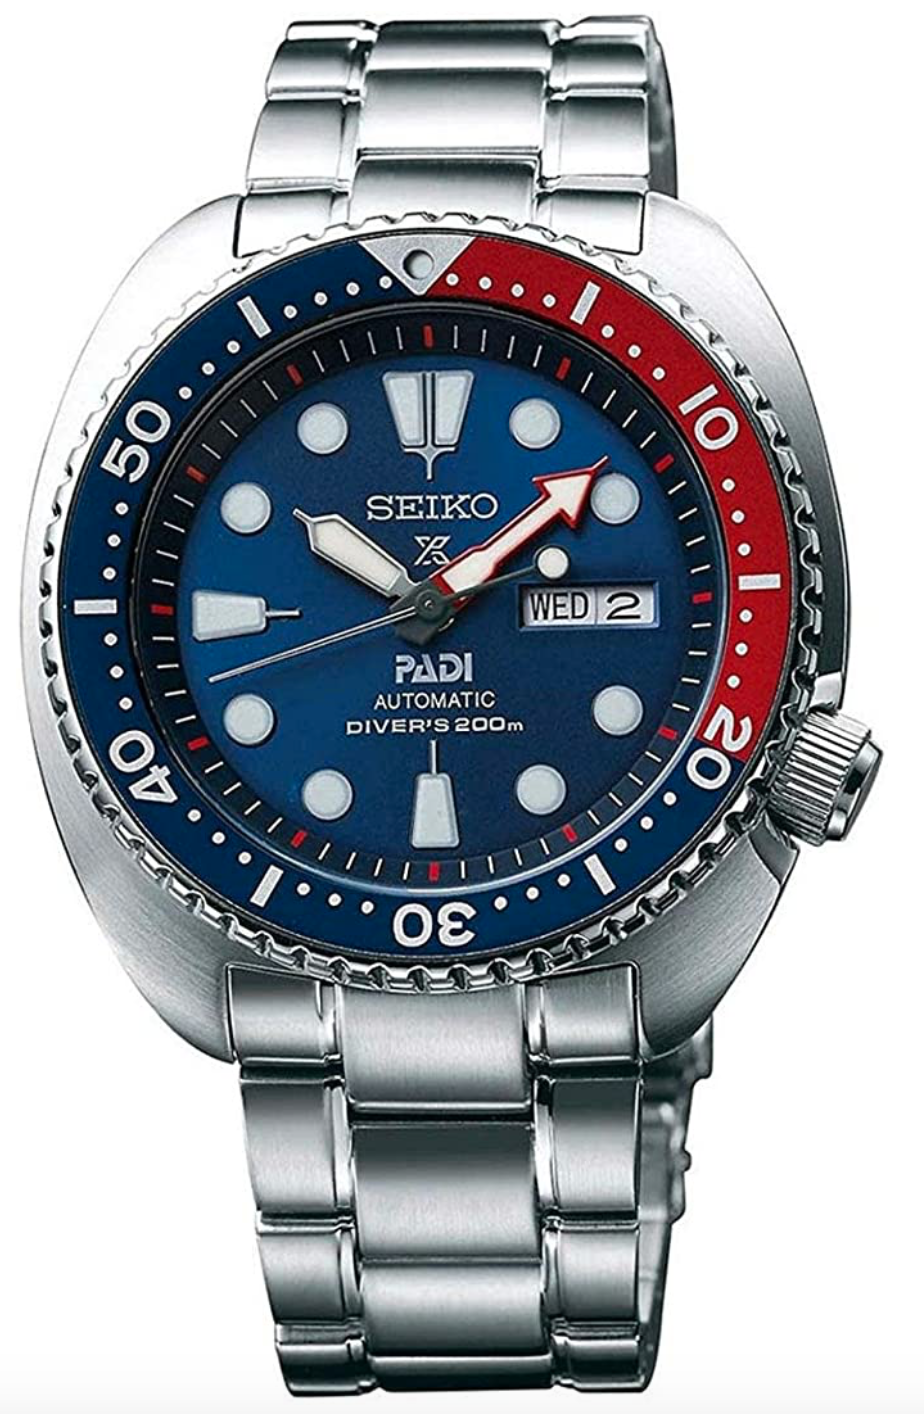 Top 12 Best Seiko Dive Watches [List & Guide] - Millenary Watches